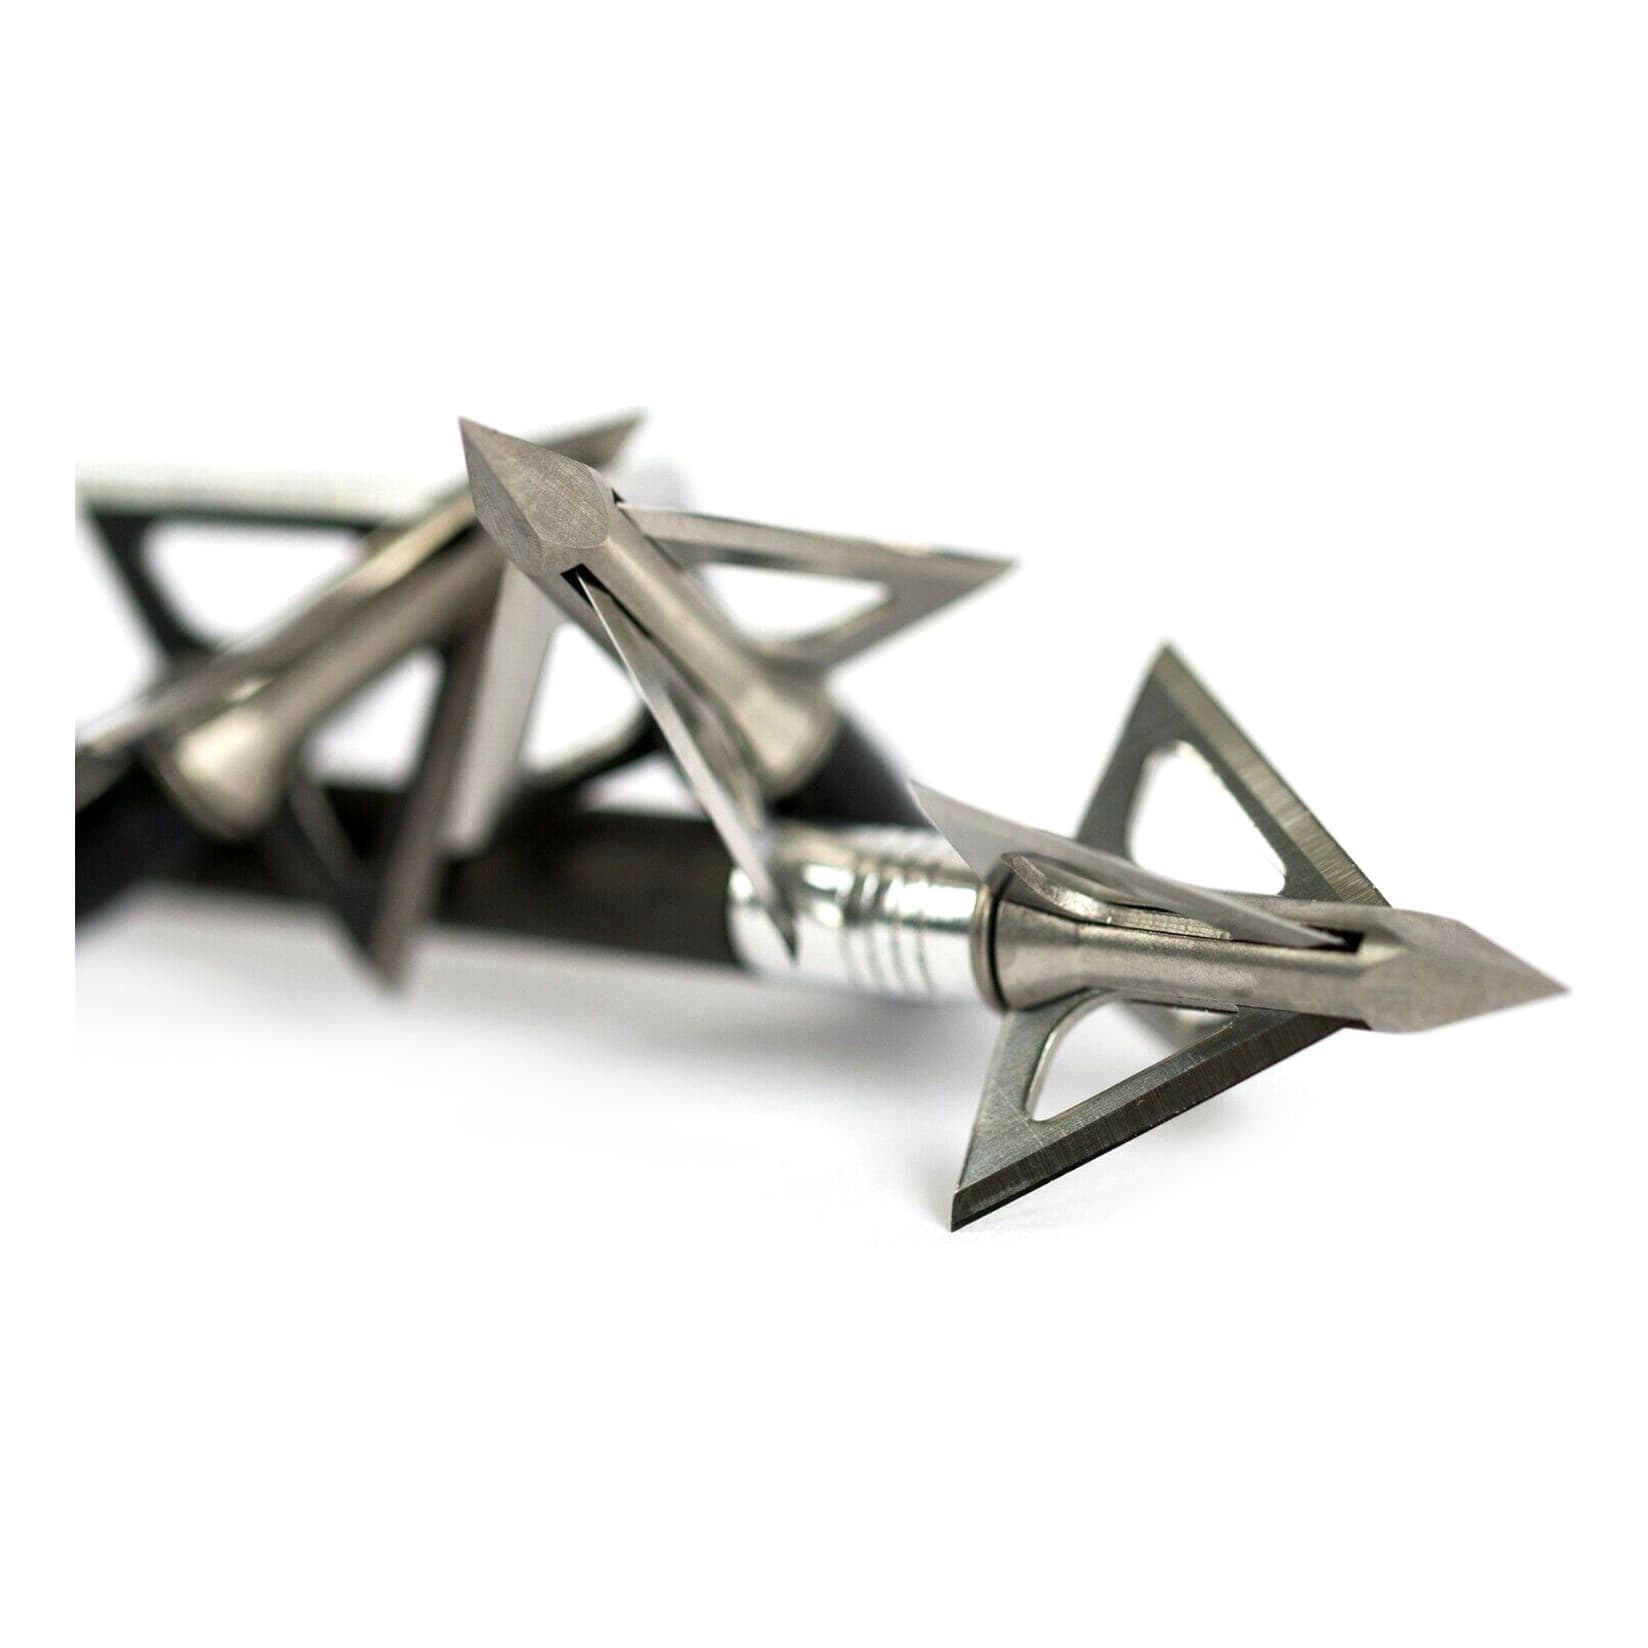 Slick Trick Magnum Stainless Steel Broadhead – 3-Pack - out of package